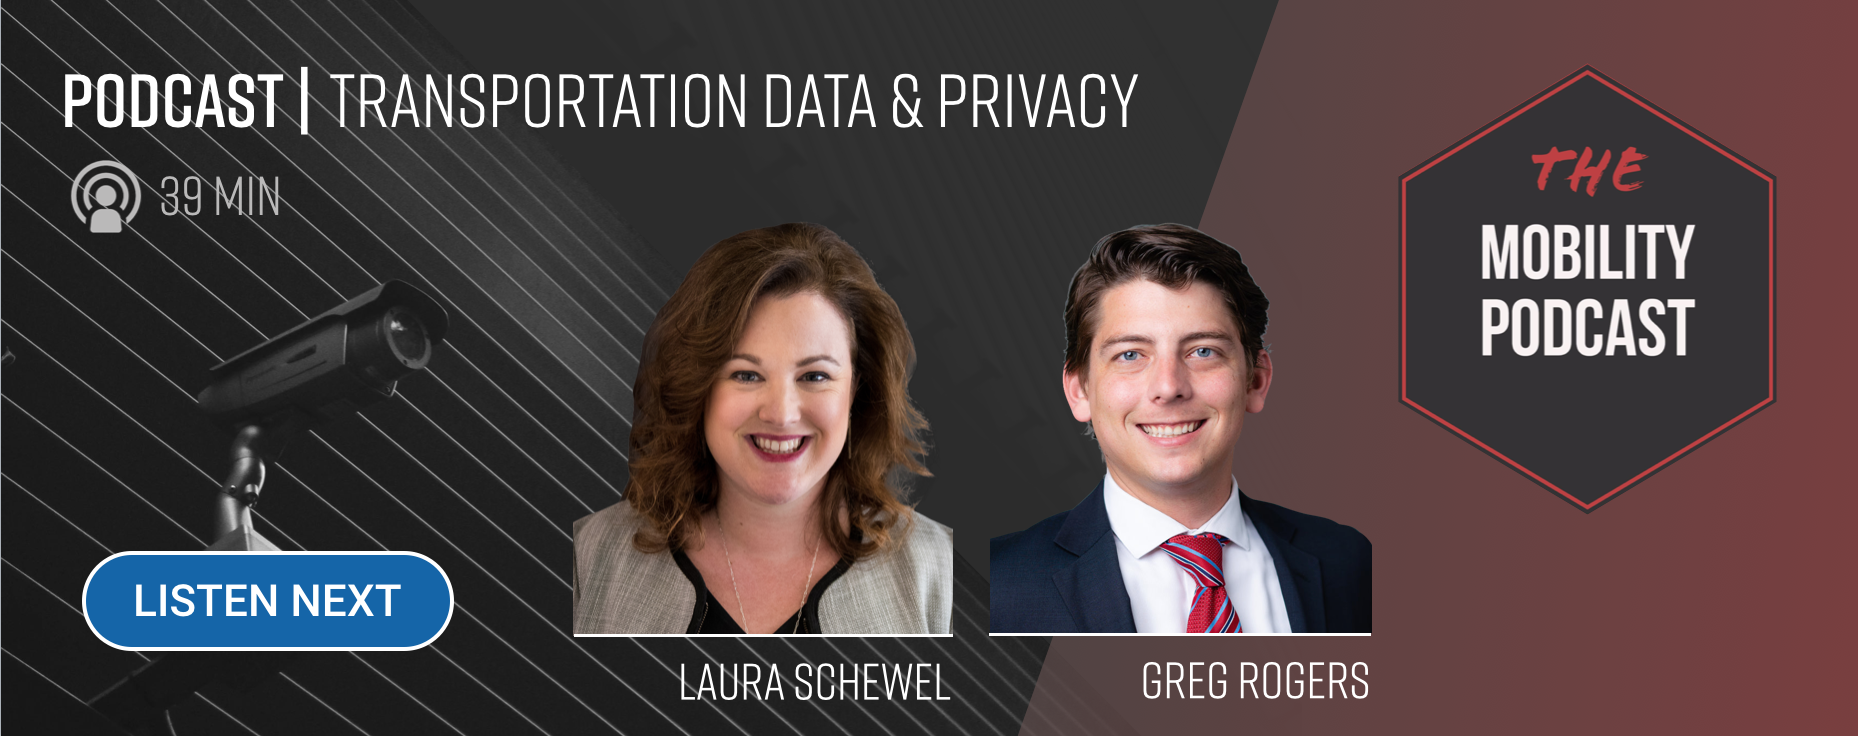 Transportation Data and Privacy Podcast